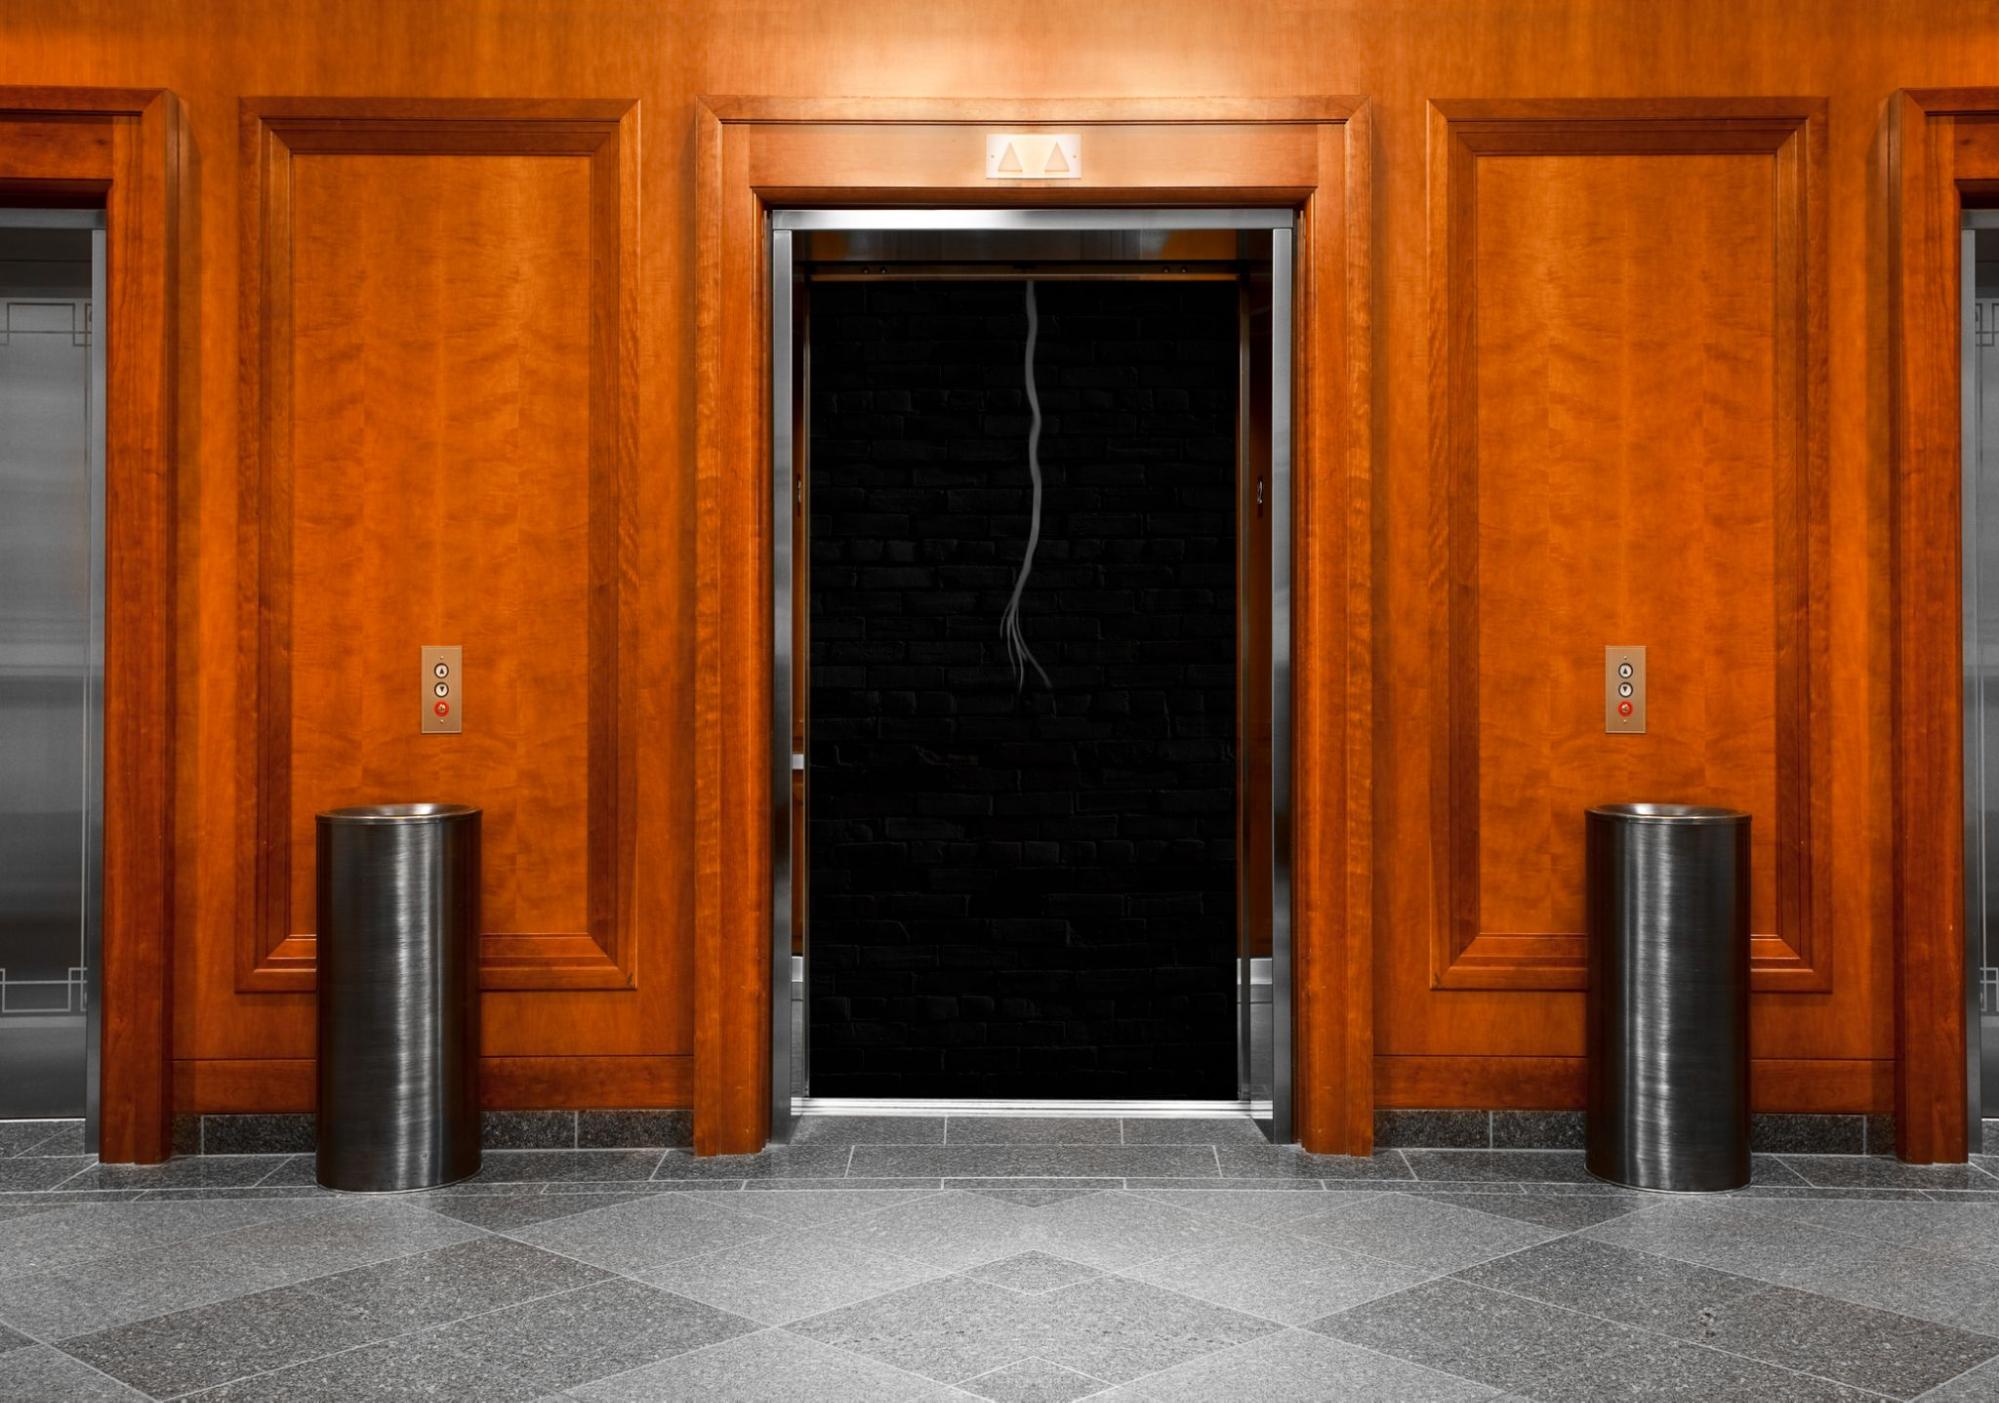 Outdated-elevator-systems-are-similar-to-technology-that-doesn’t-work-for-you.jpg